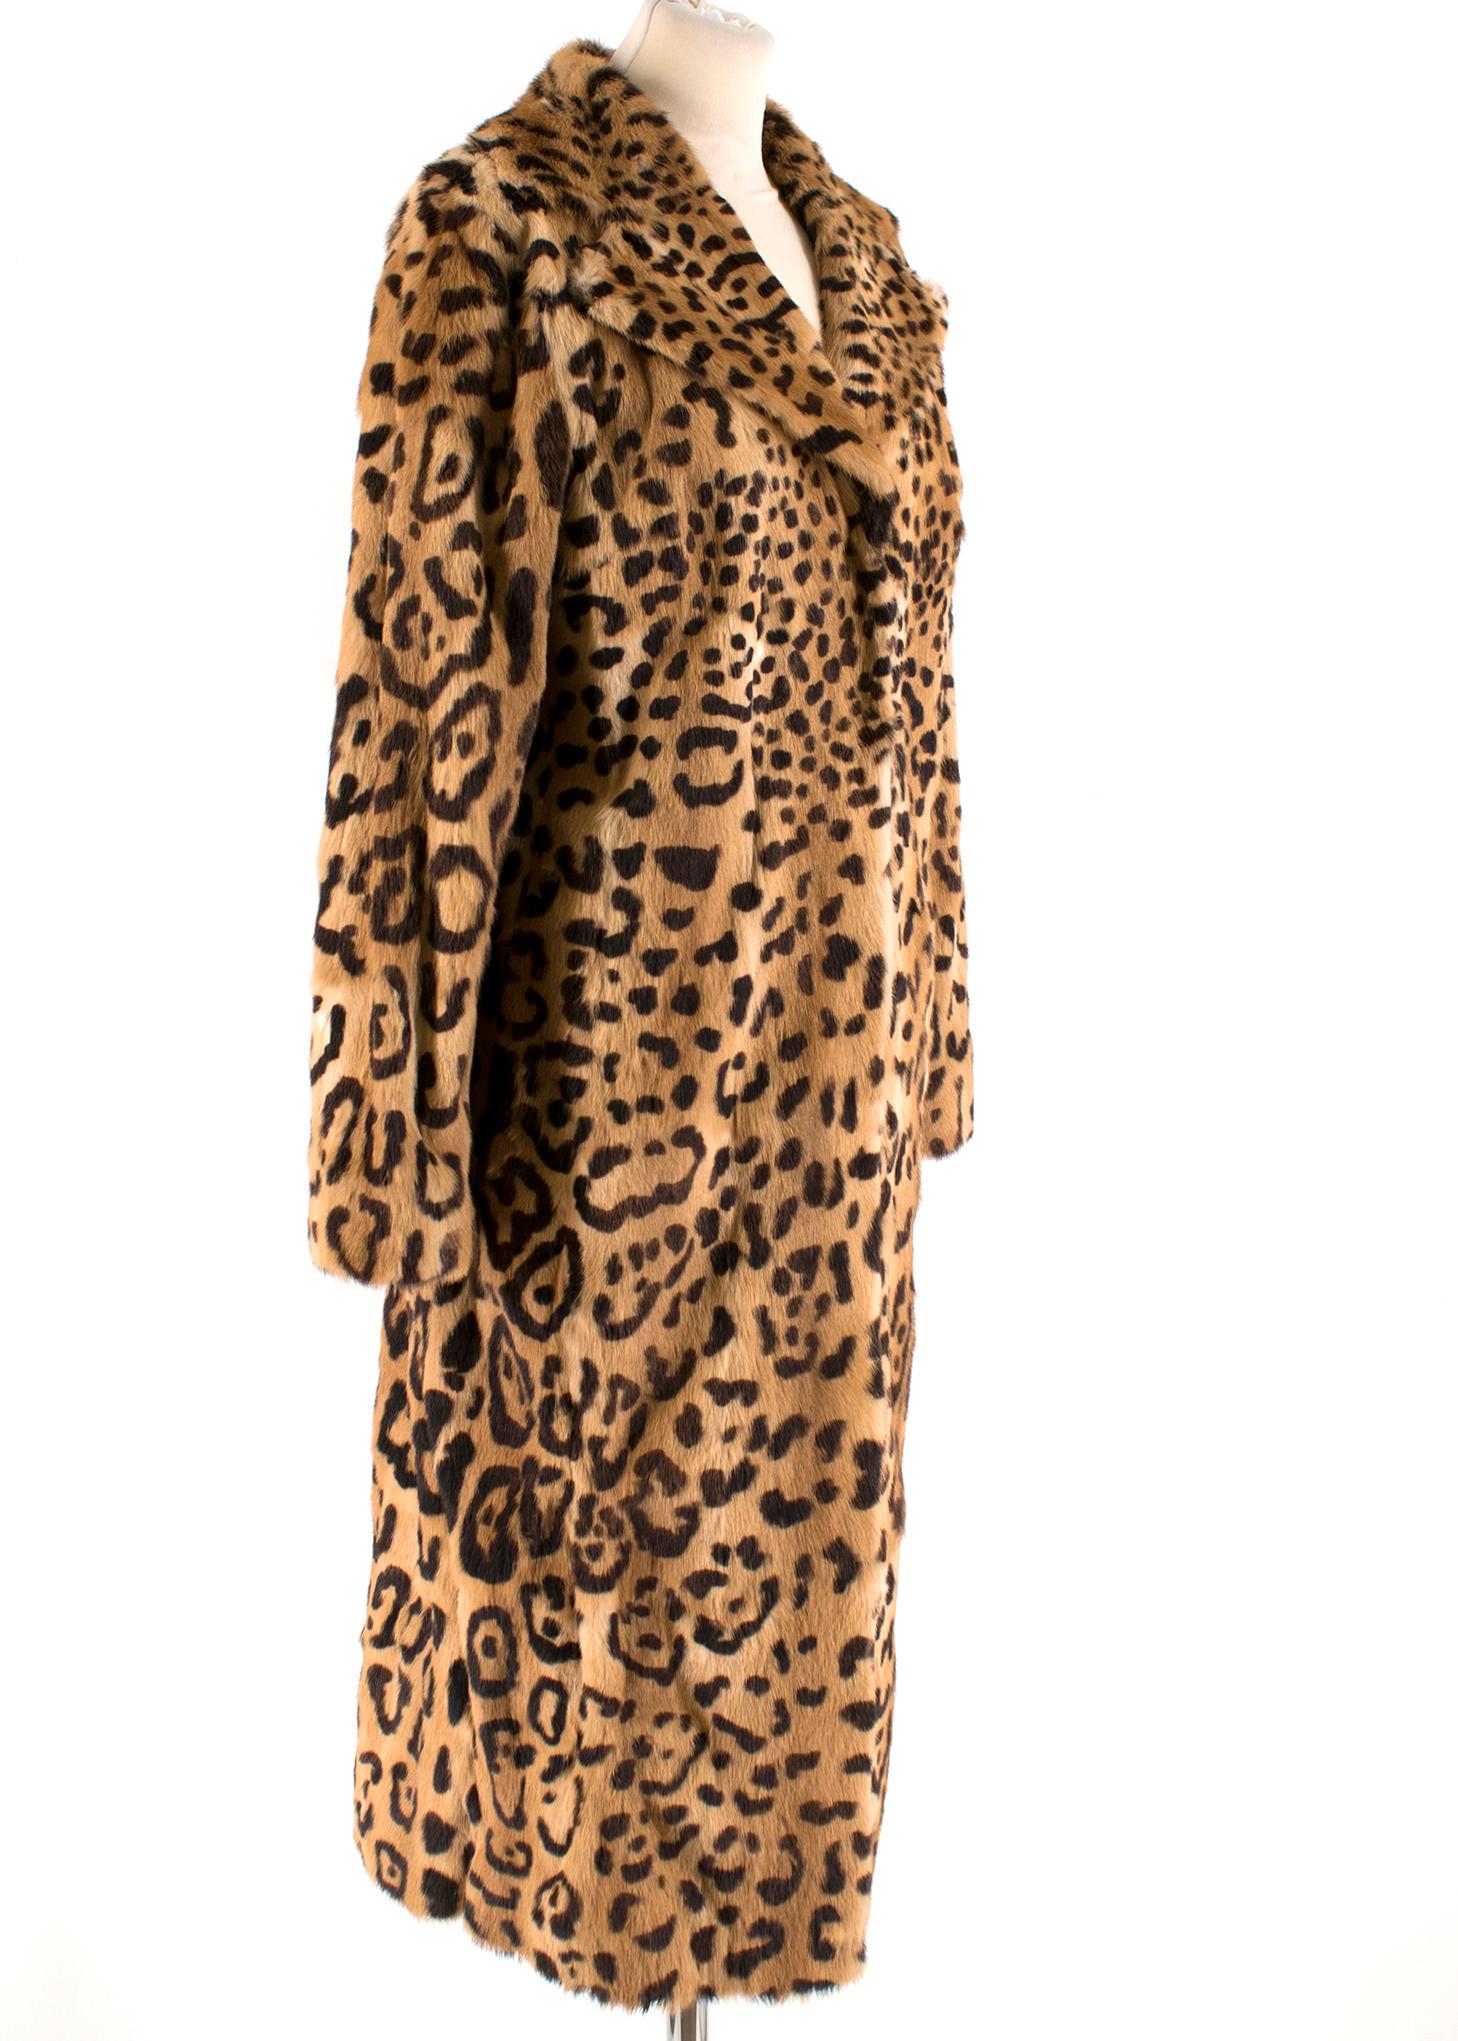 Dolce & Gabbana Kolinsky Fur Long Animal Print Coat 

- Snap Button Front Closure 
- Long Sleeves
- Leather Lined Side Pockets 
- Silk Blend Lining 
- Collar 

Specialist Clean Only 

Made in Italy 

Measurements are taken with the item lying flat,